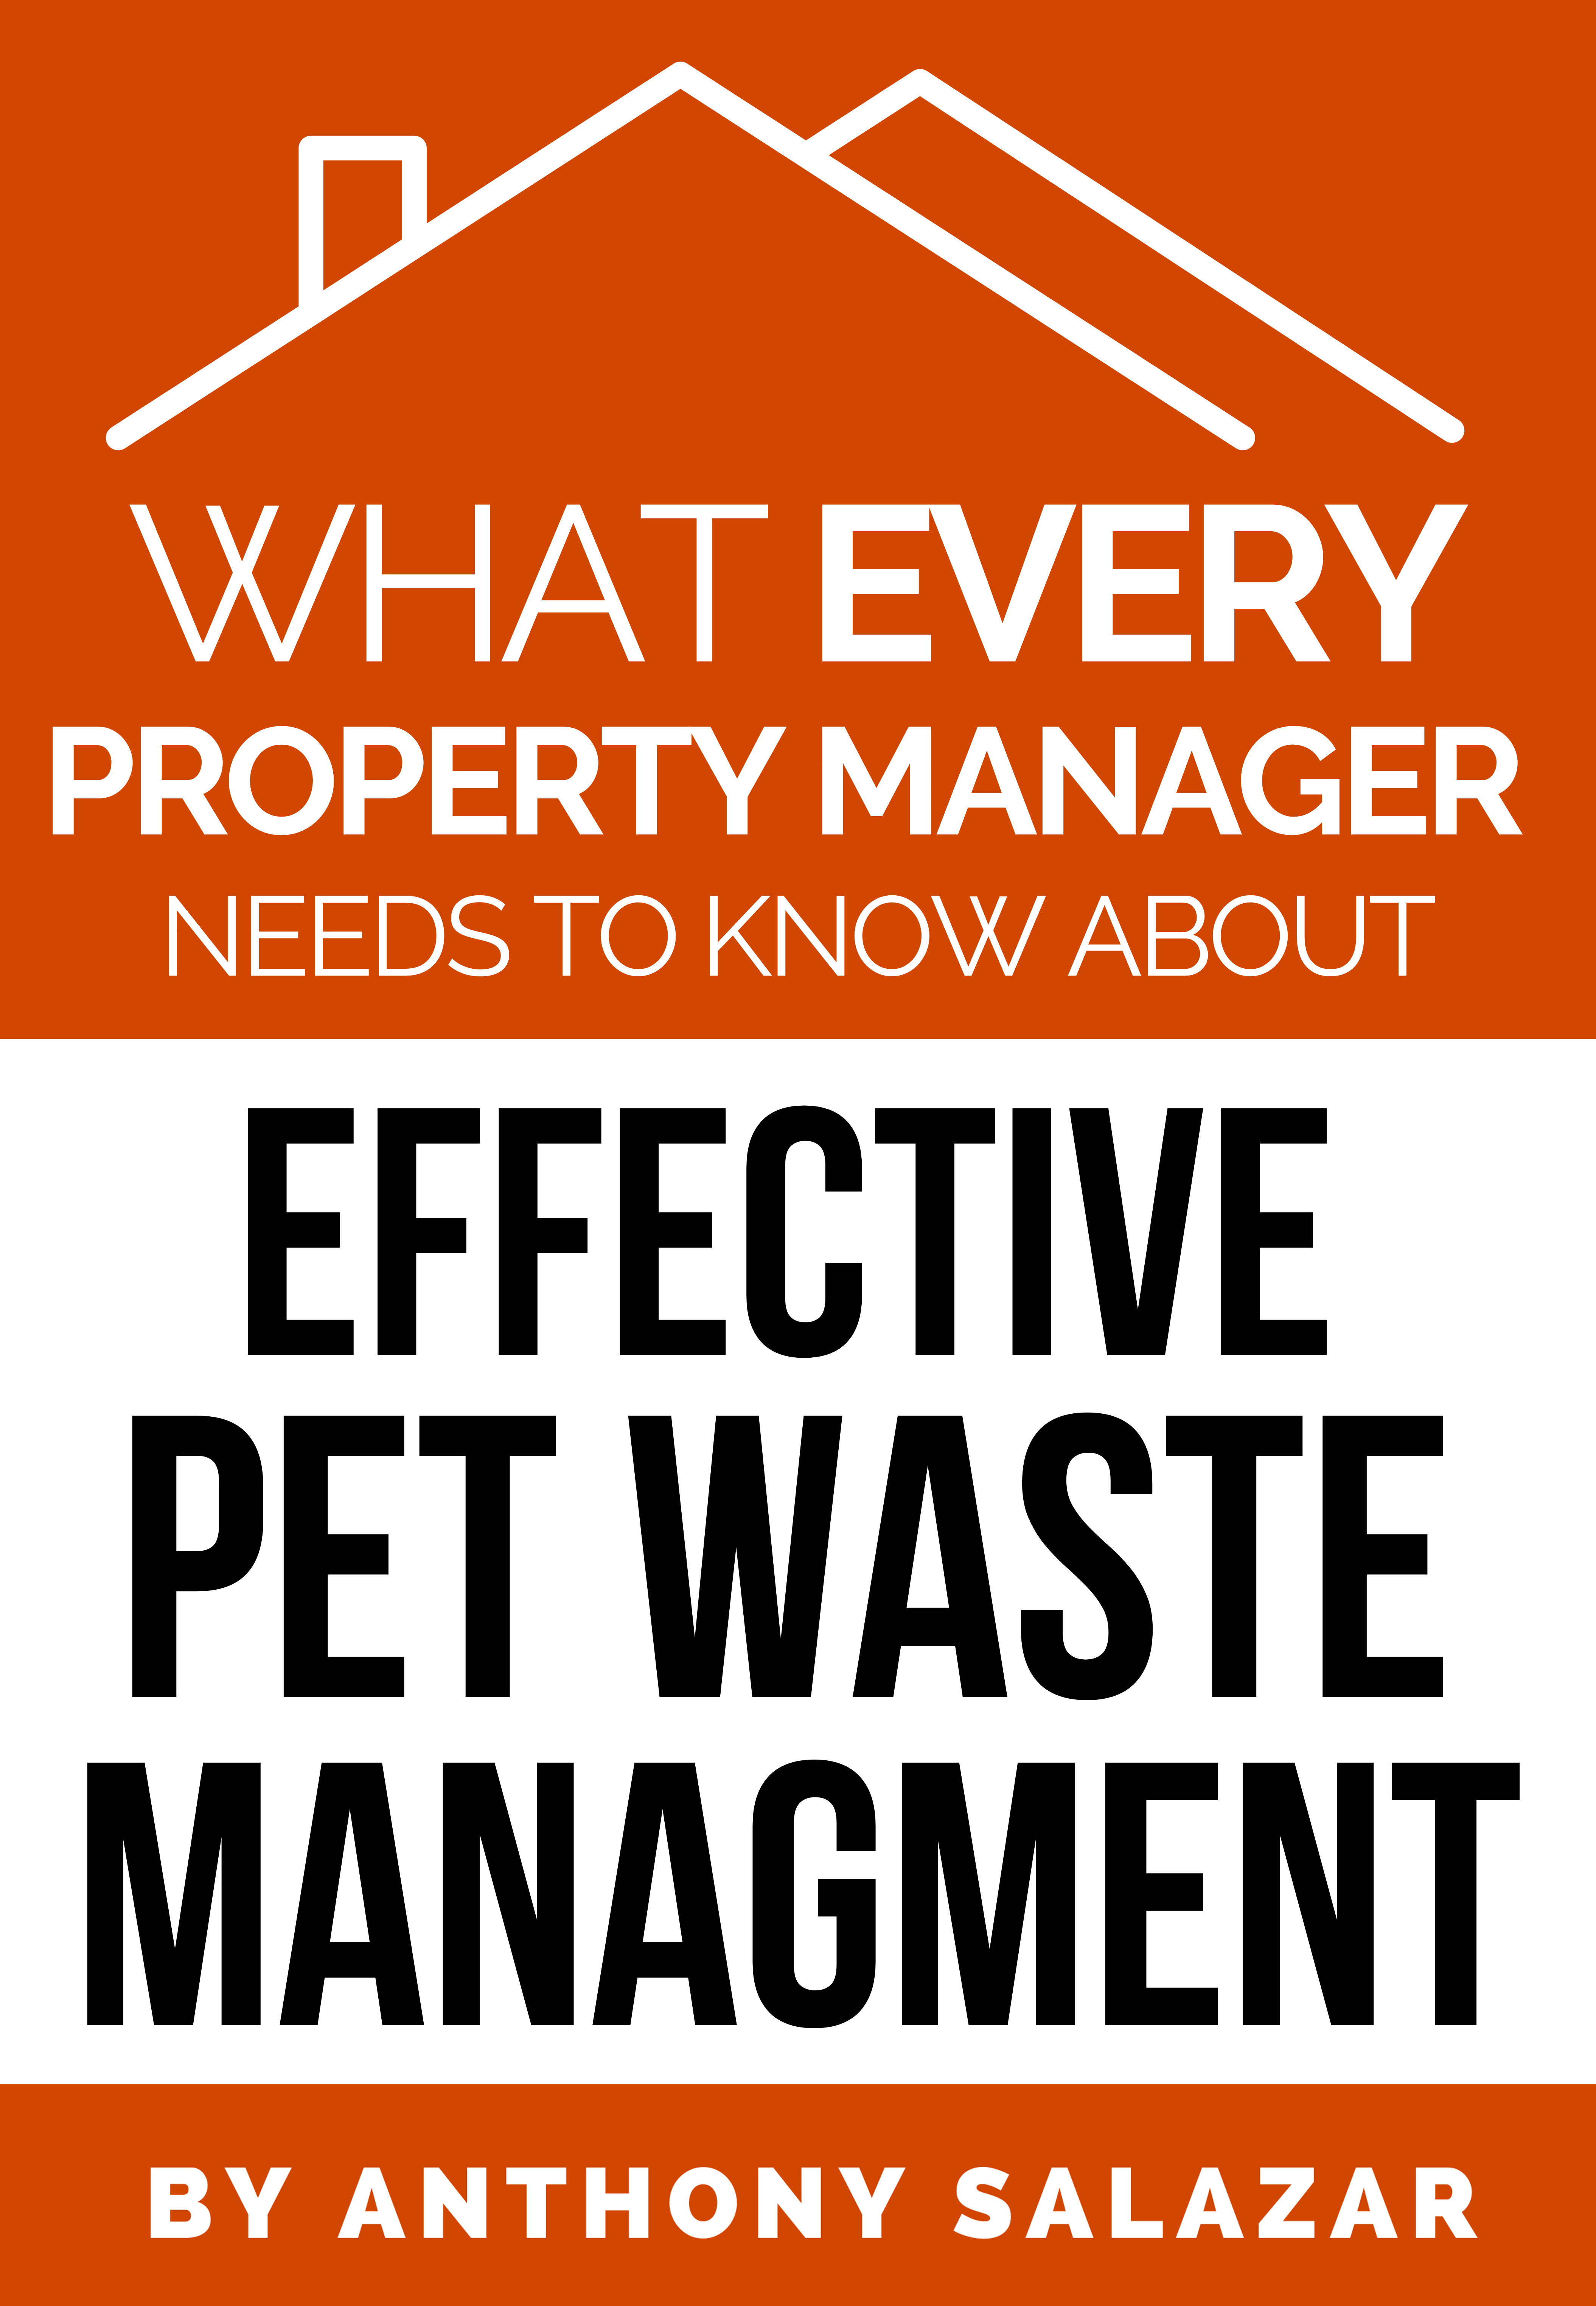 New Book "What Every Property Manager Needs To Know About Effective Pet Waste Management" Released by Anthony Salazar